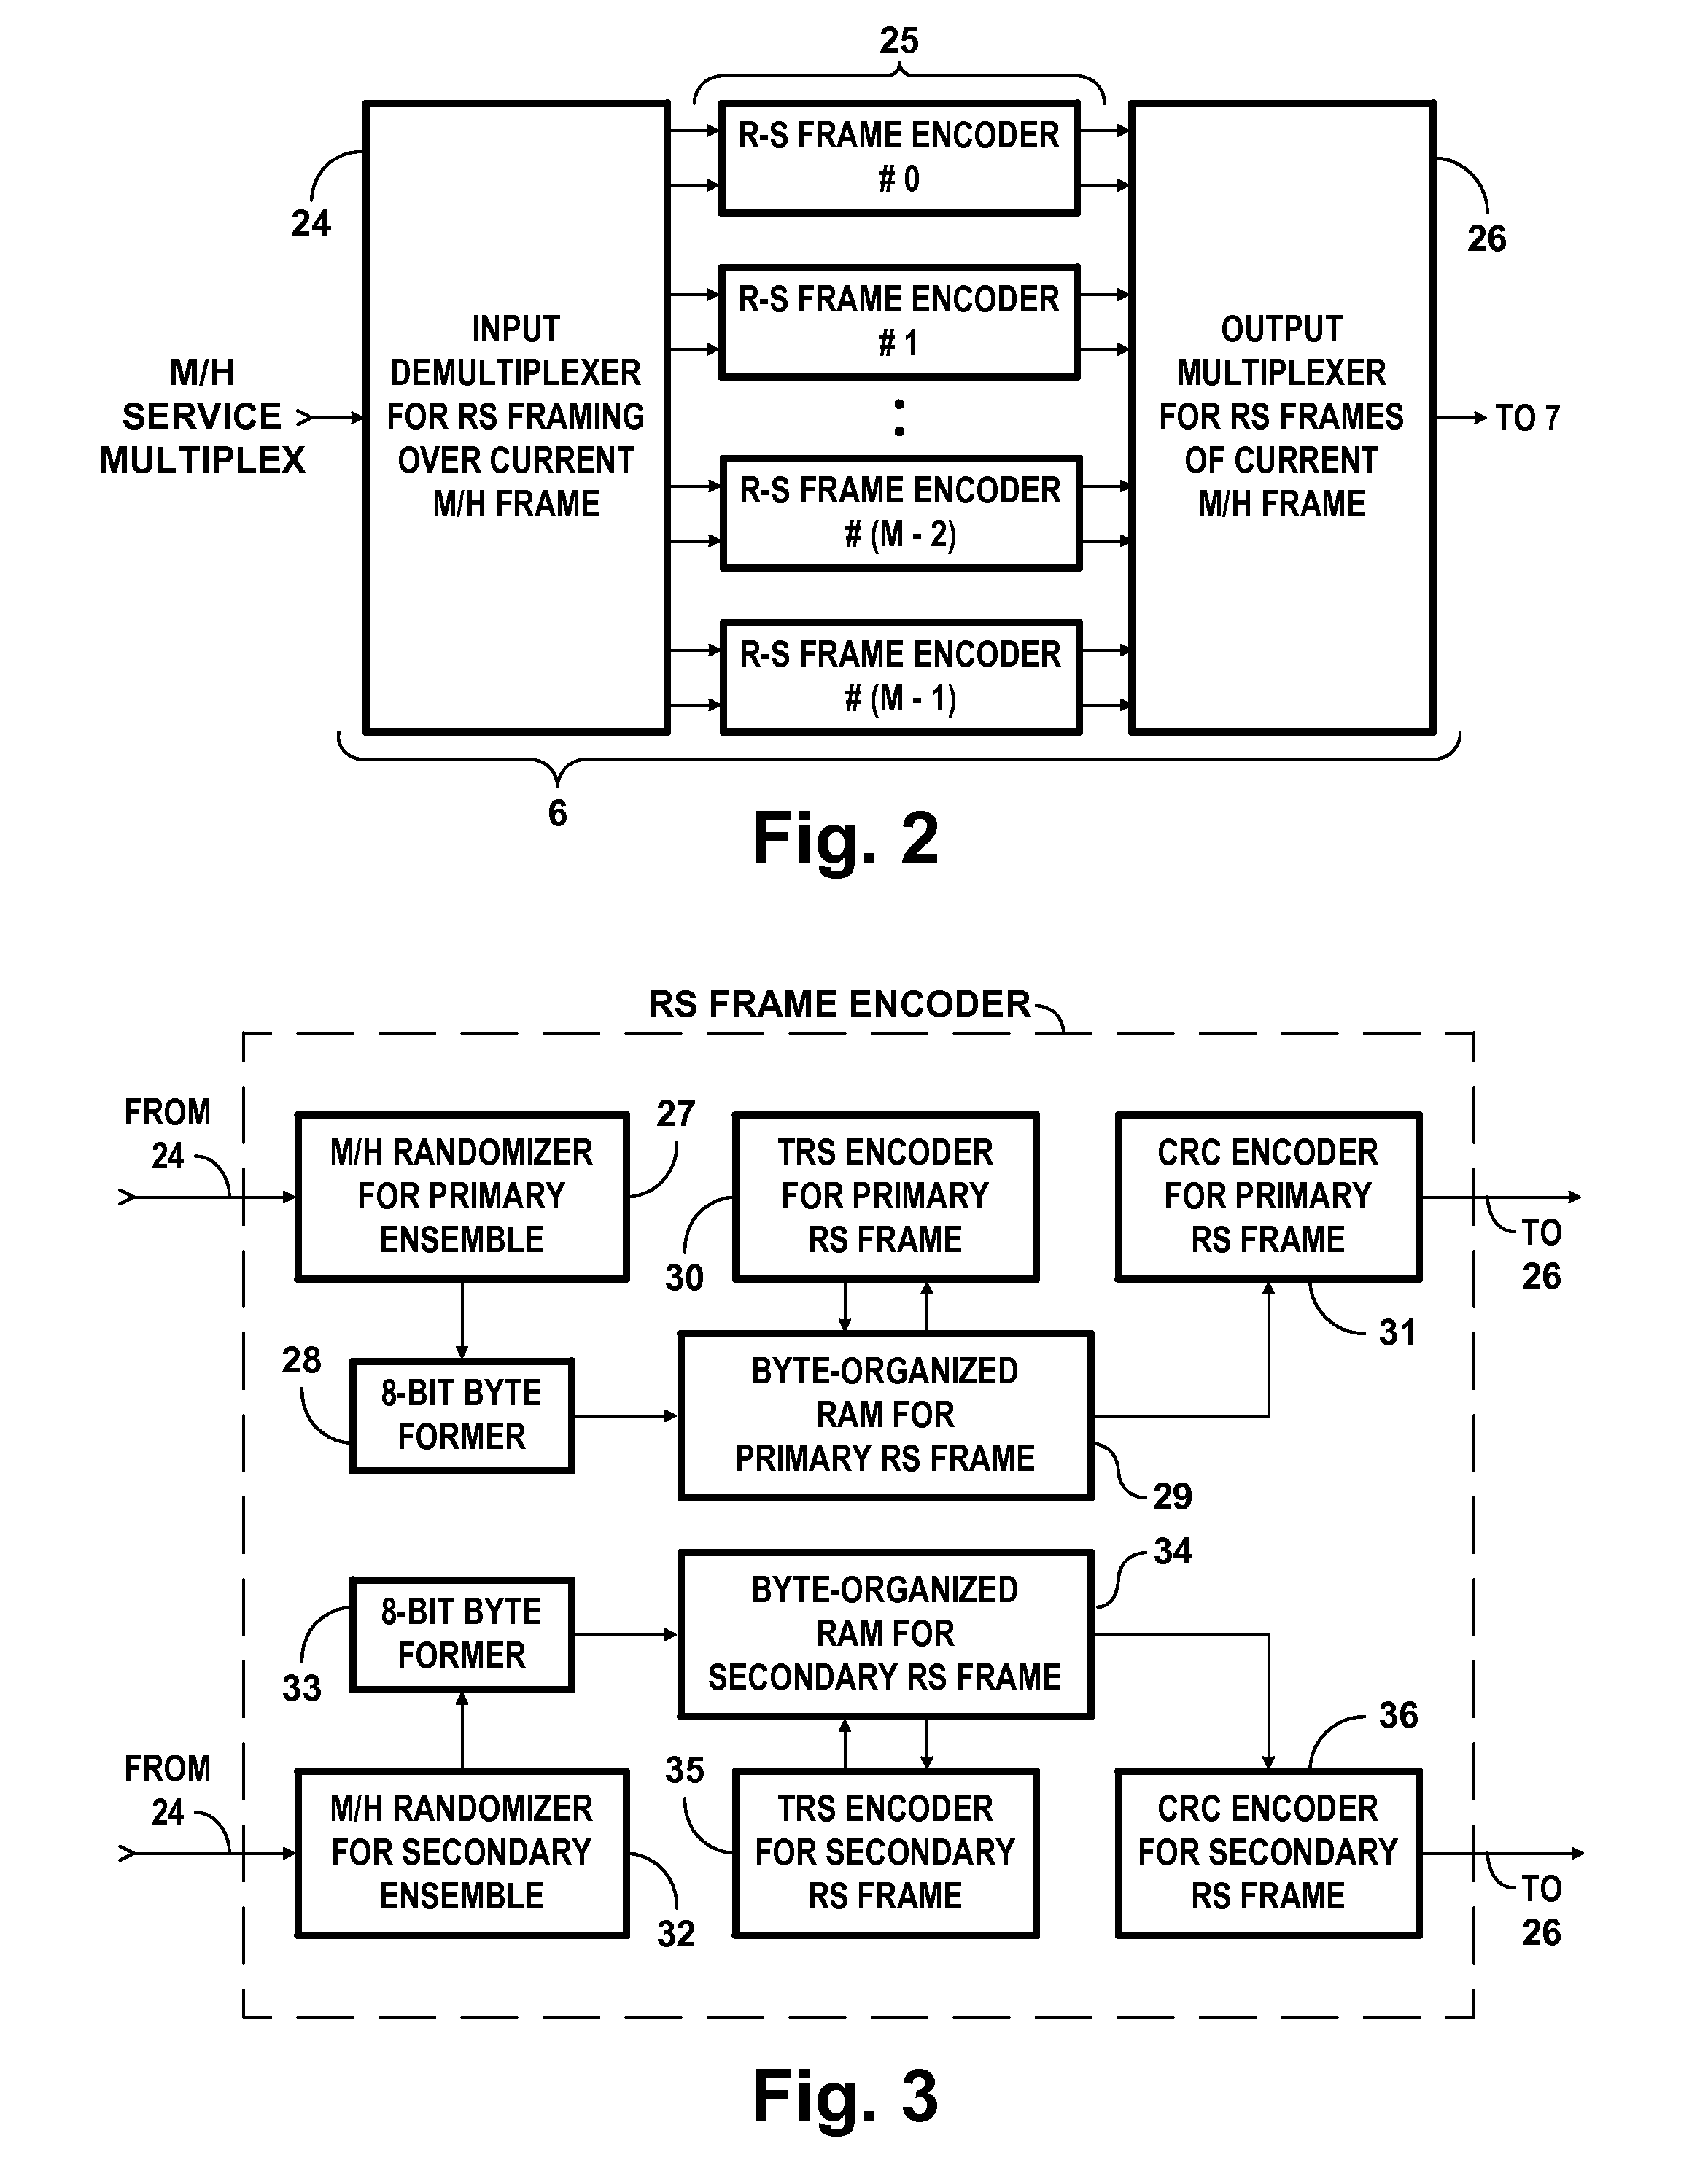 Apparatus for adapting reception modes of a mobile DTV receiver in response to signaling